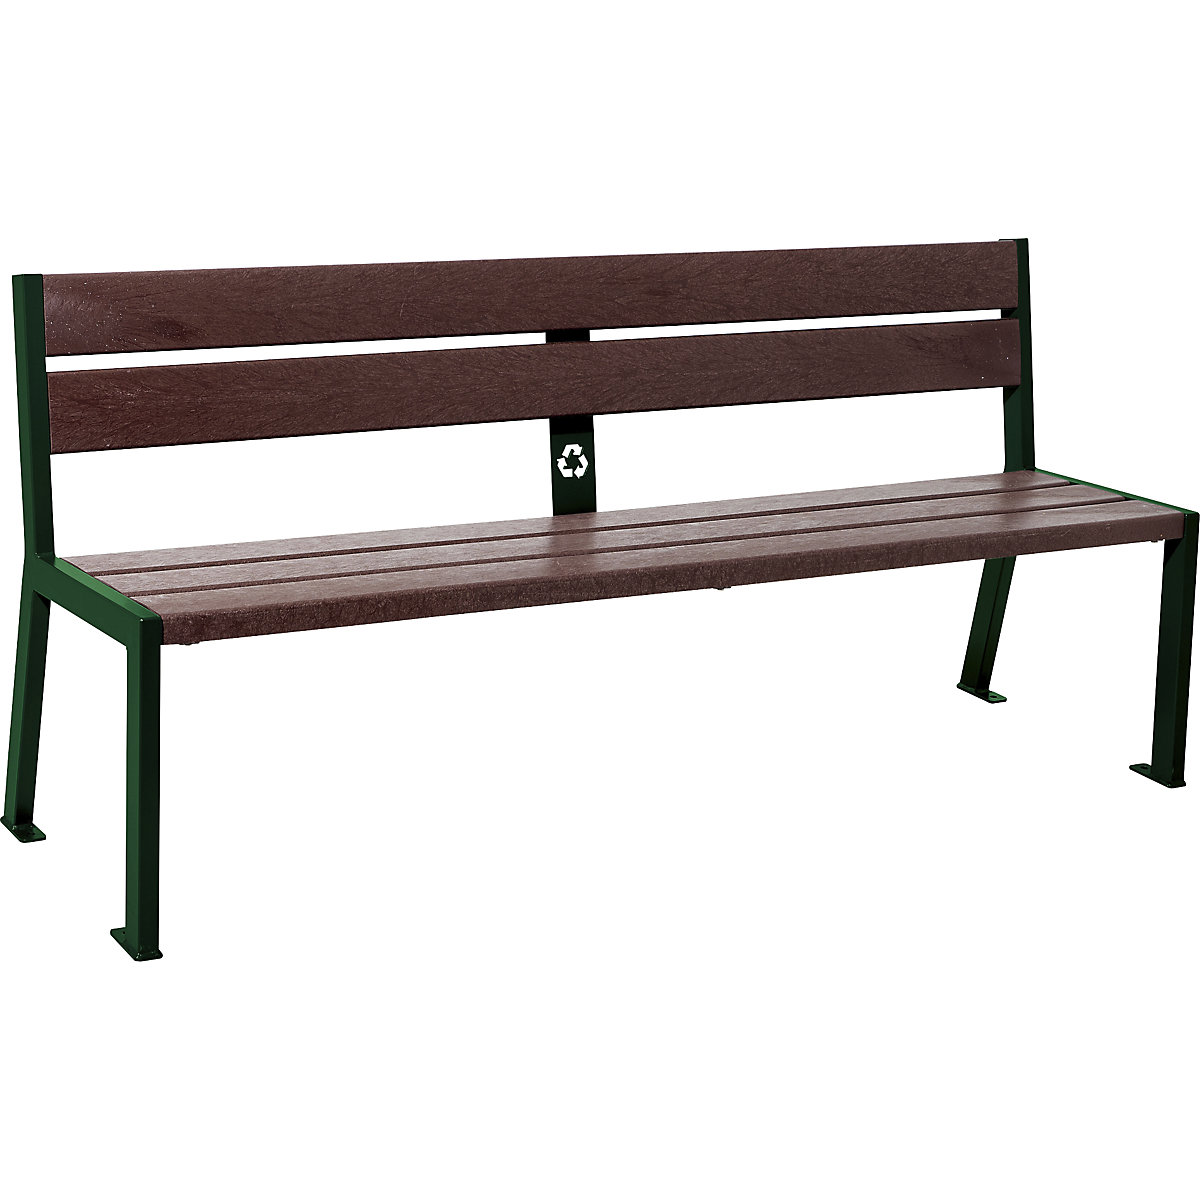 SILAOS® bench made of recycled plastic – PROCITY